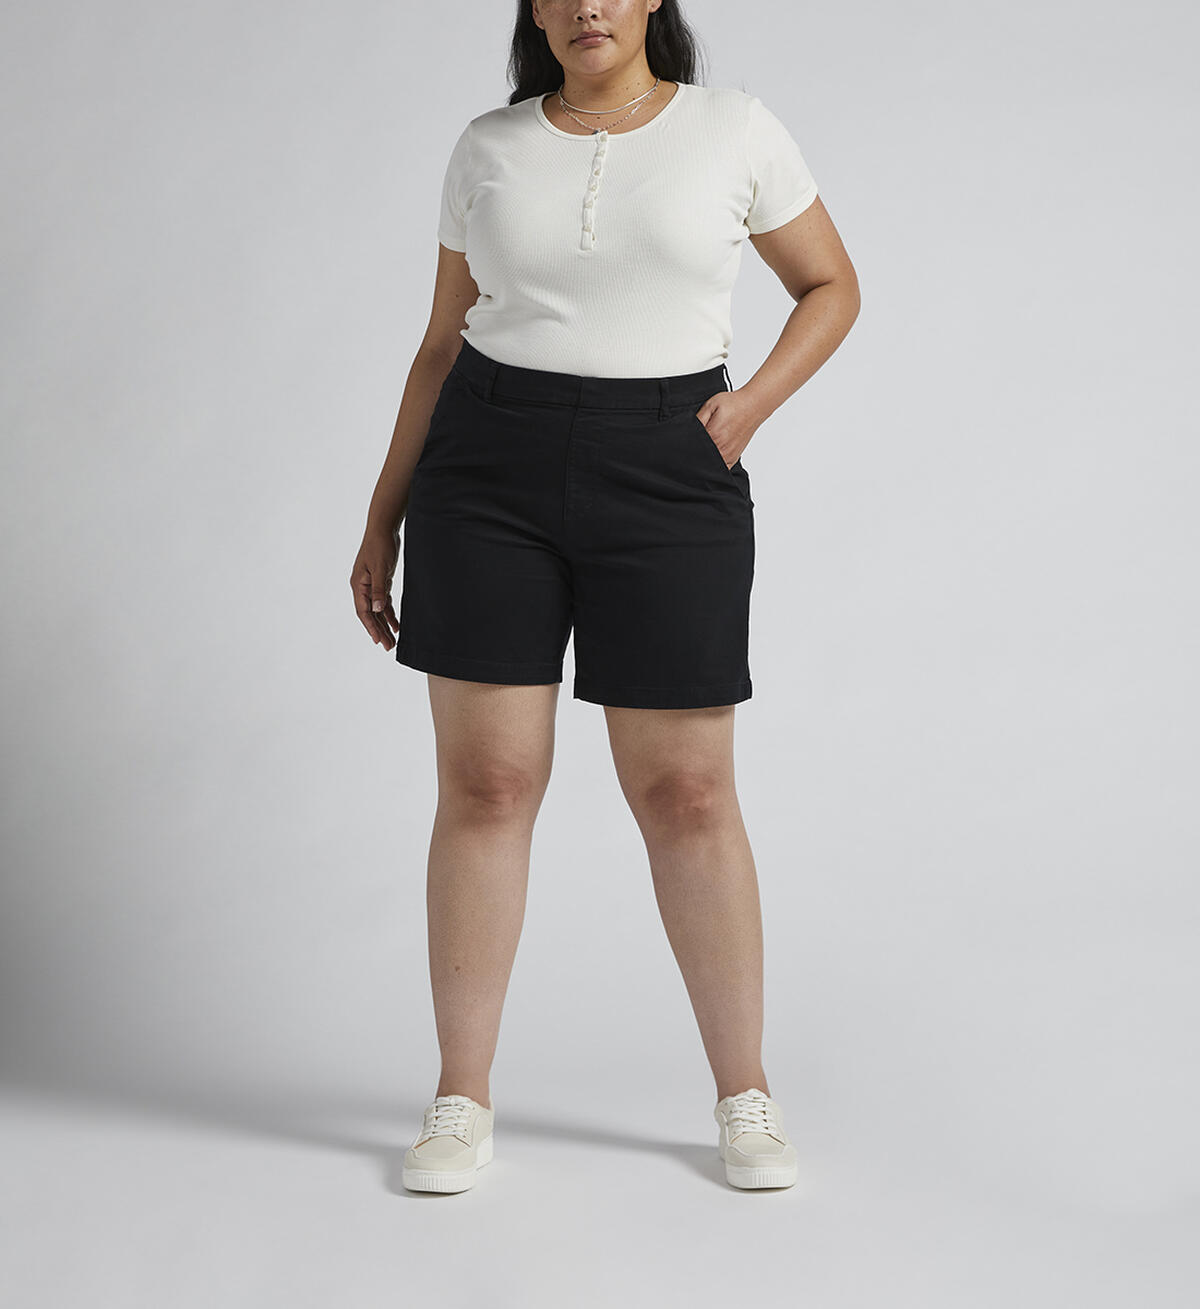 Maddie Mid Rise 8-inch Pull-On Short Plus Size, Black, hi-res image number 0